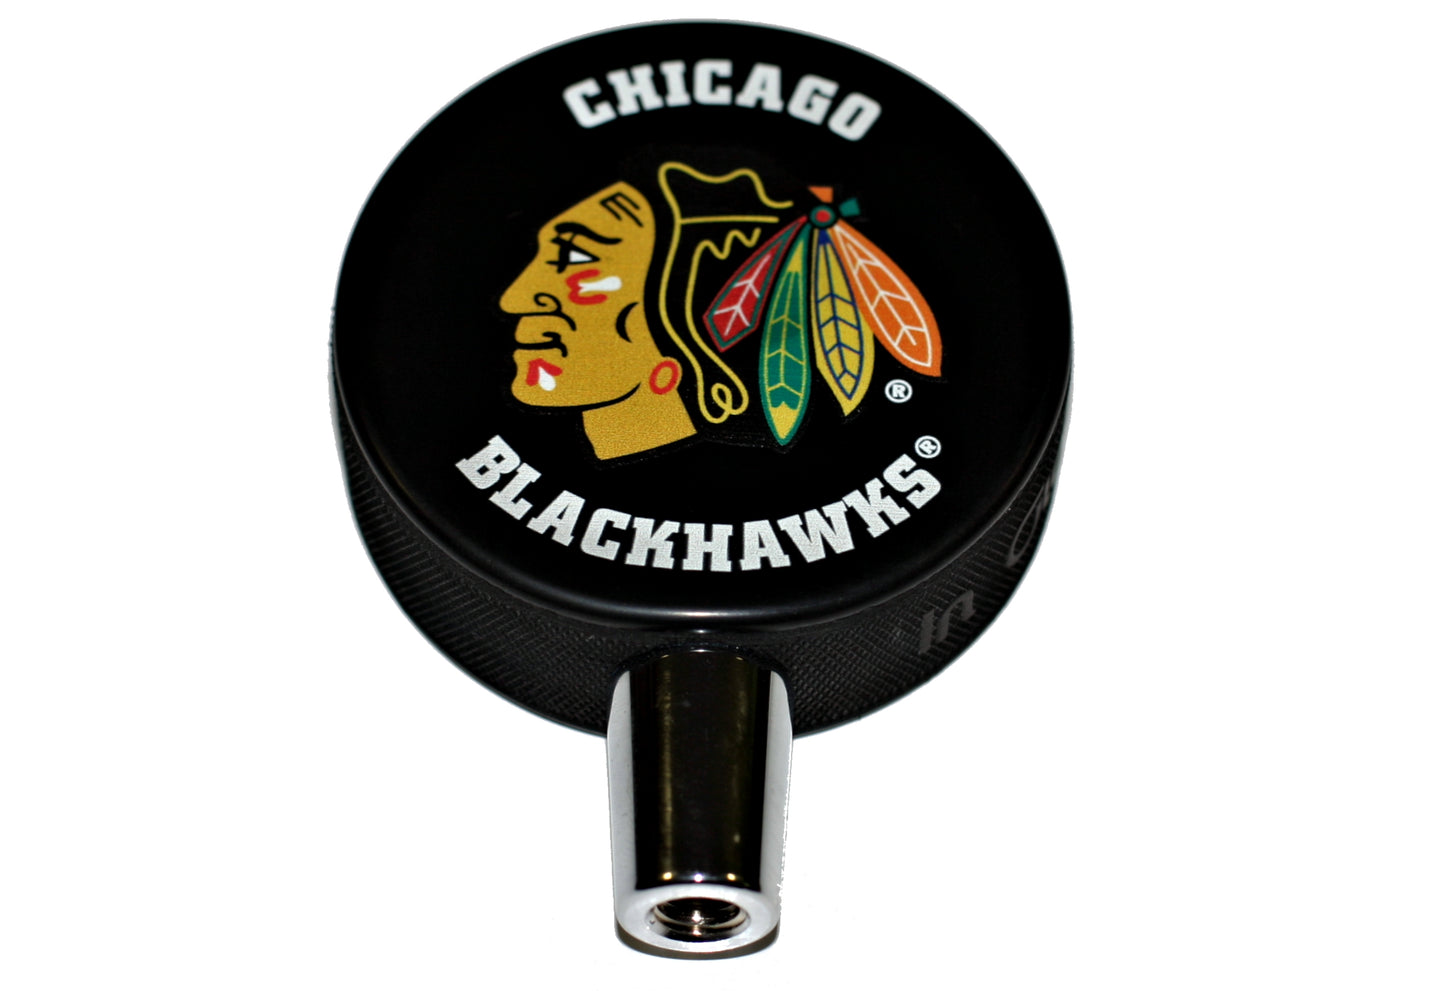 Chicago Blackhawks Hockey Puck And Chicago White Sox Baseball Beer Tap Handle Set